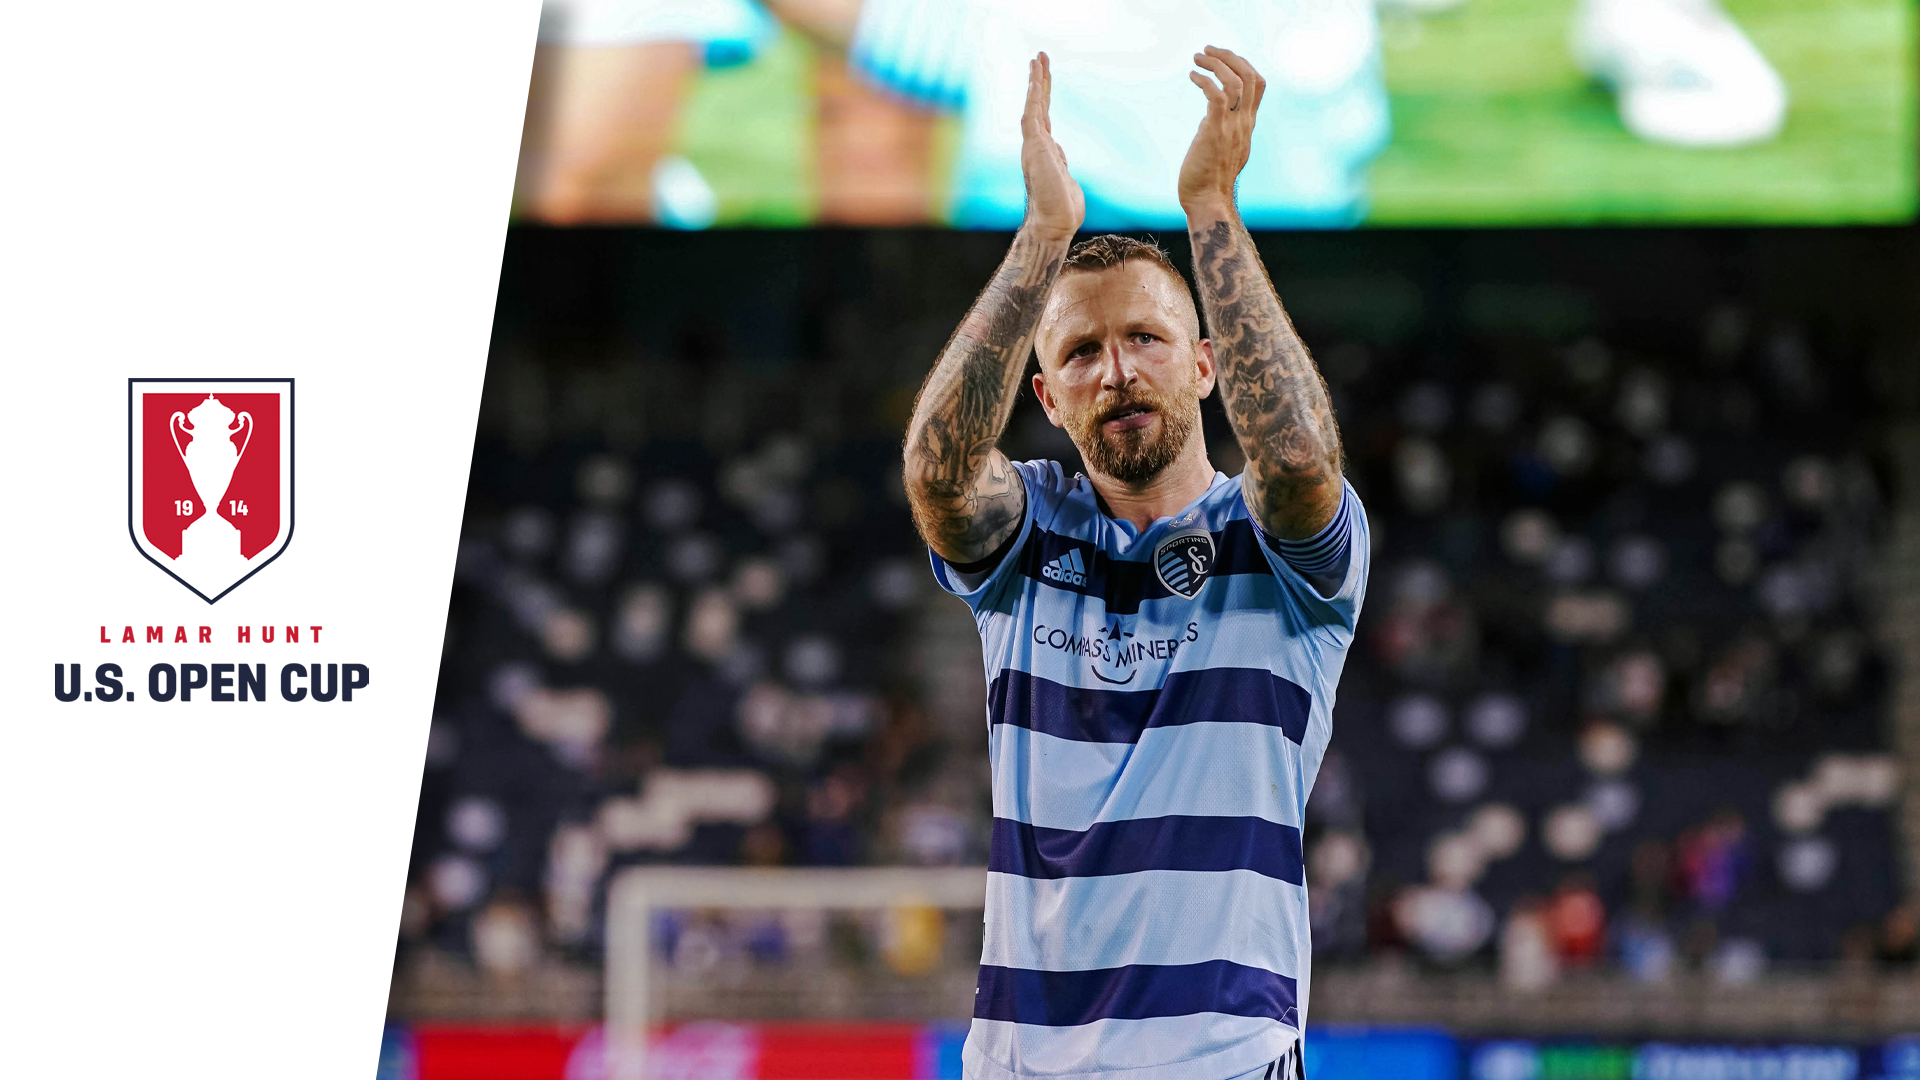 "No excuses": Amid MLS struggles, Sporting KC chart Open Cup run